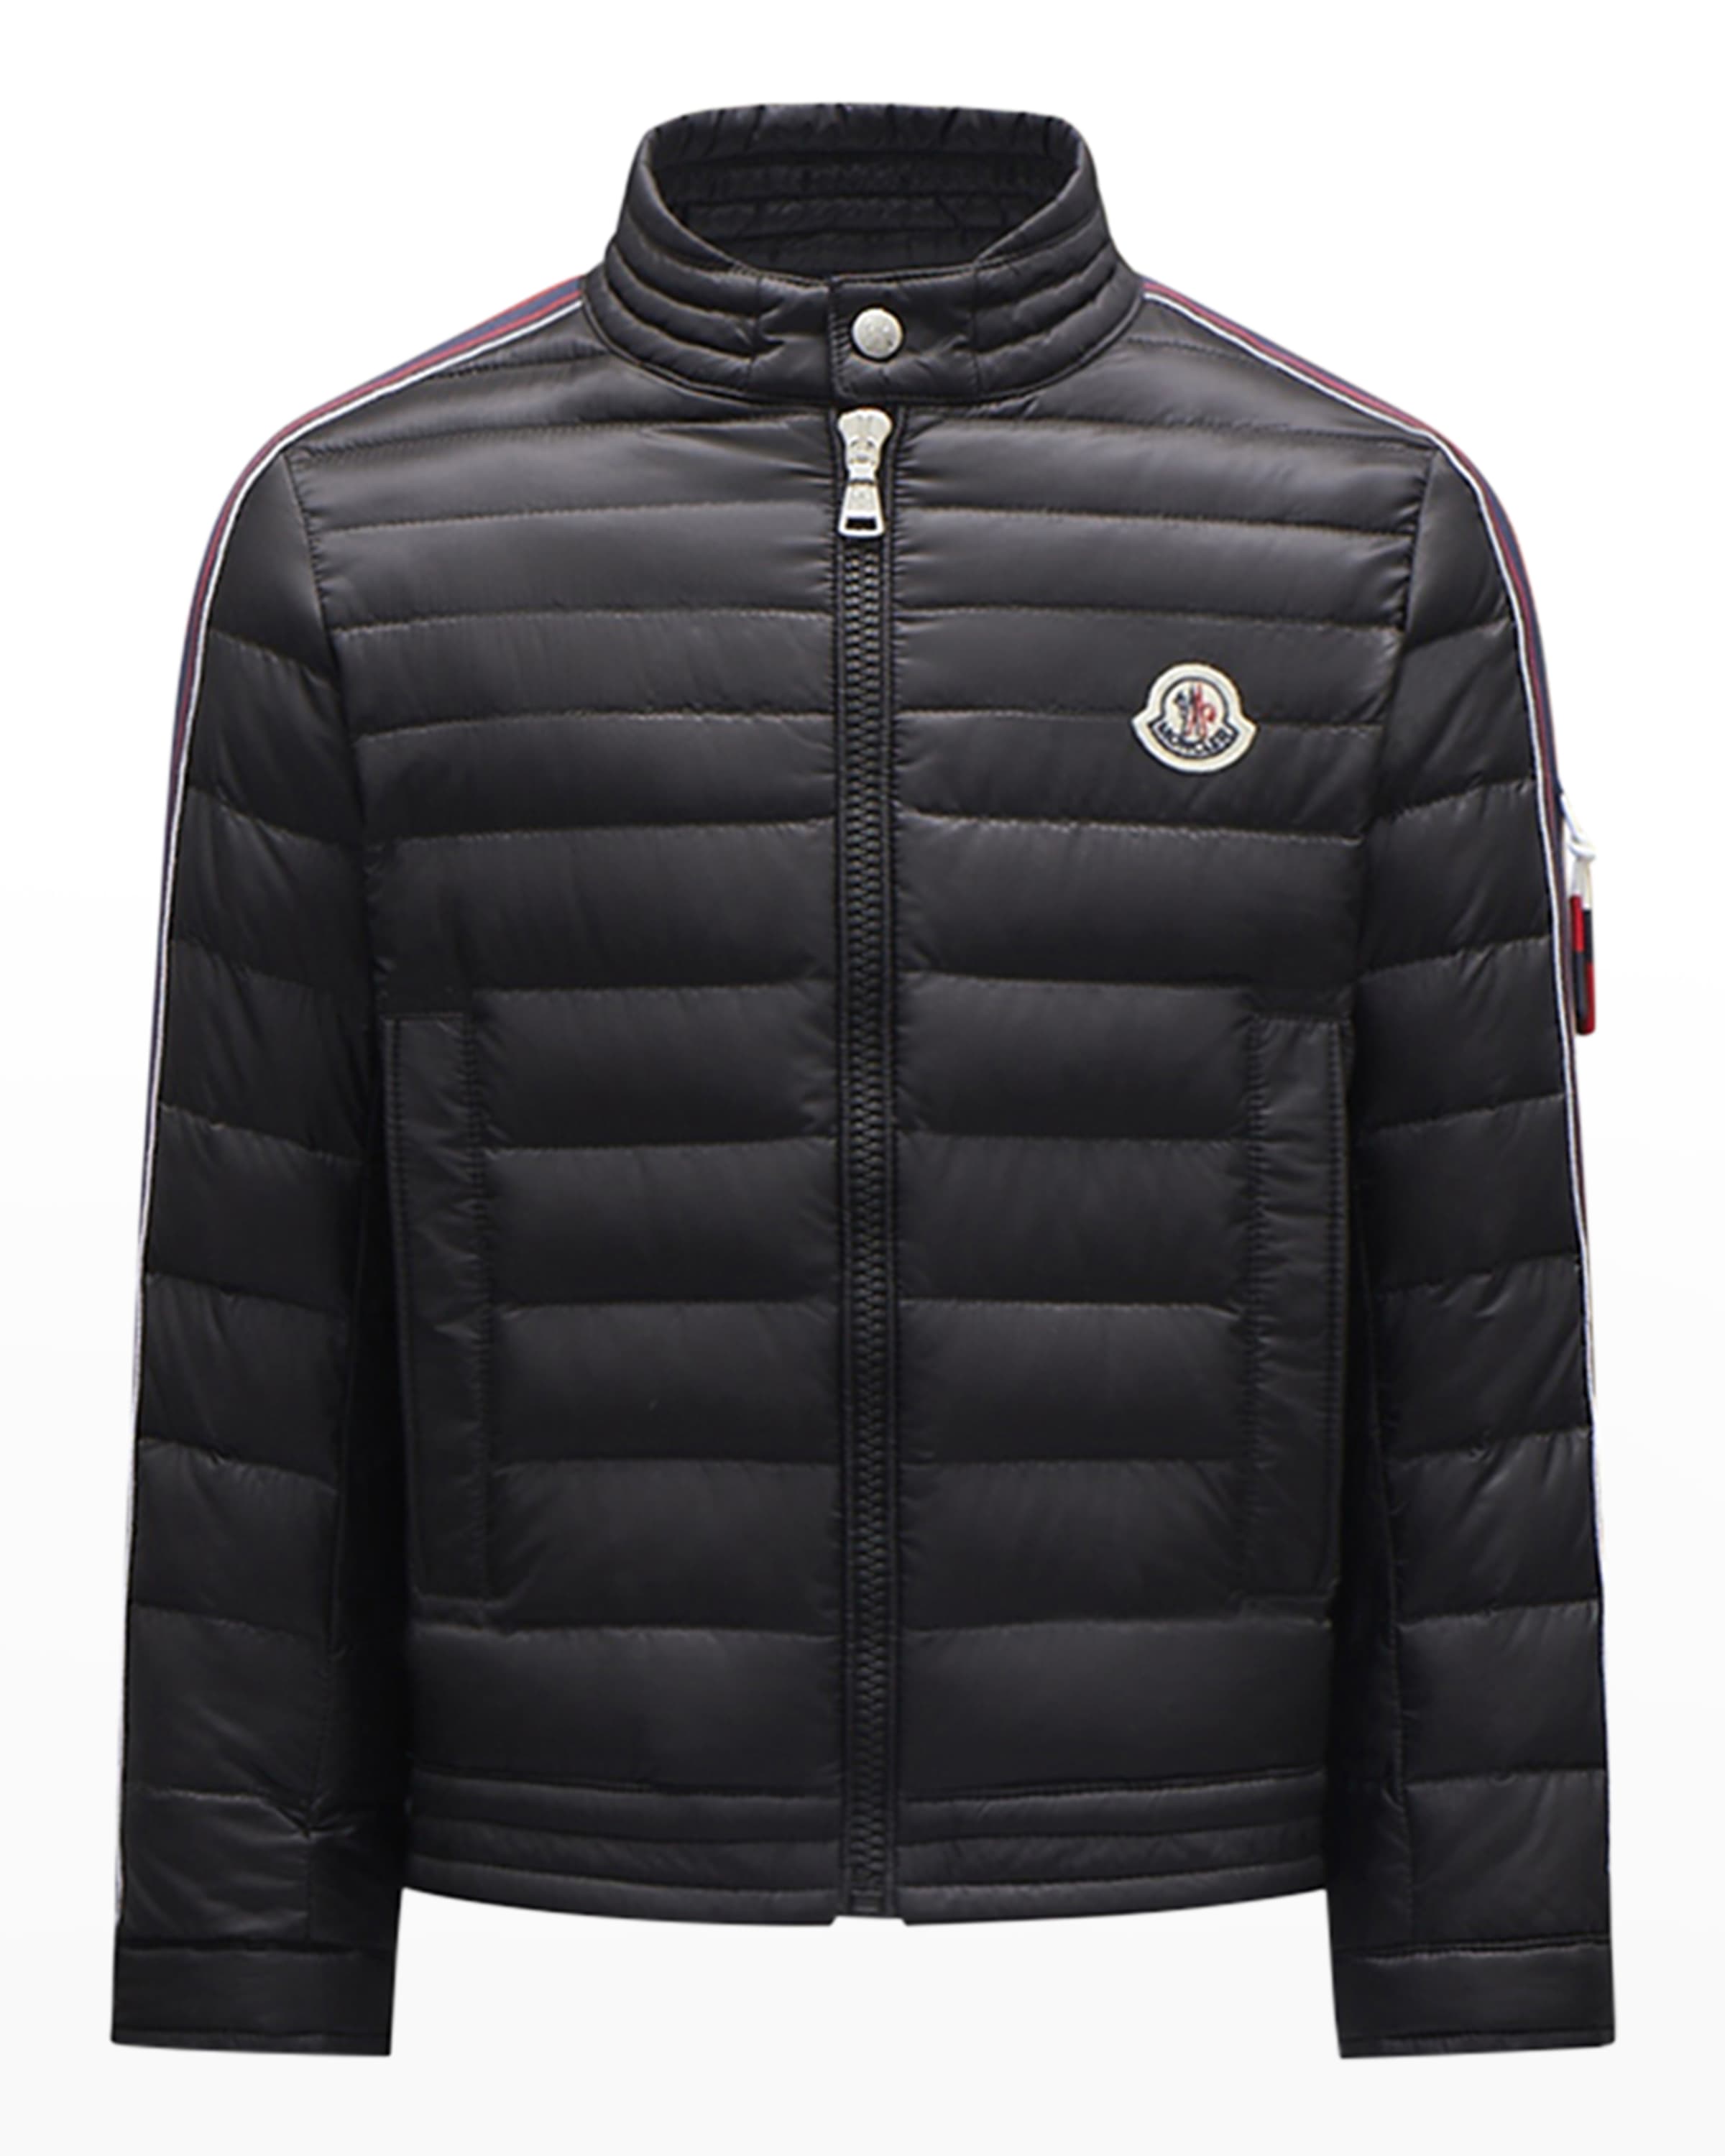 Moncler Boy's Anderm Quilted Biker Jacket, Size 4-6